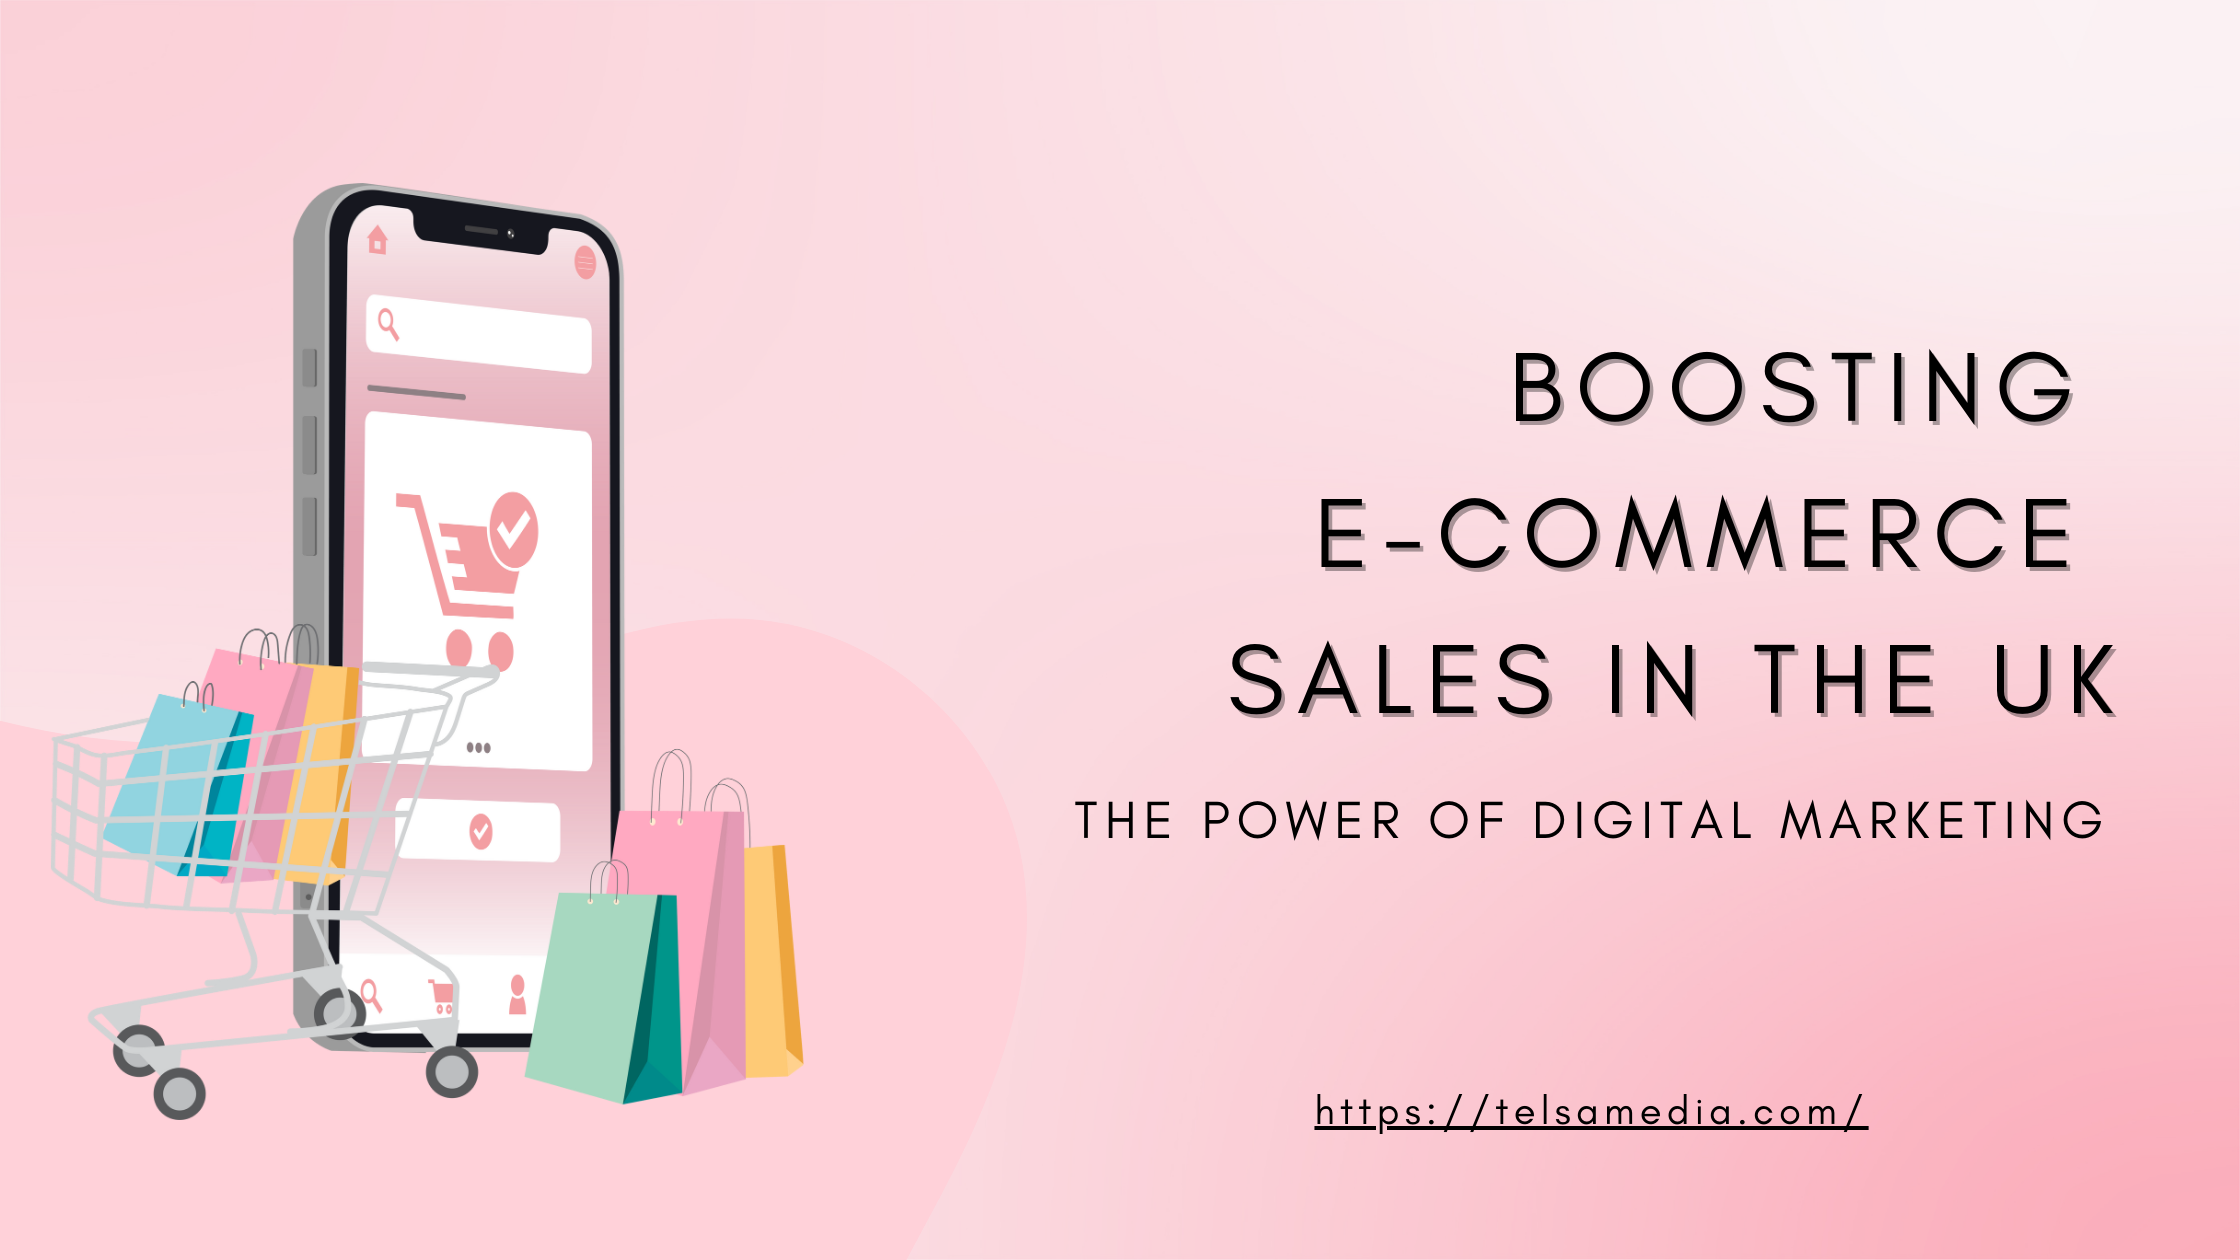 Boosting E-commerce Sales in the UK: The Power of Digital Marketing